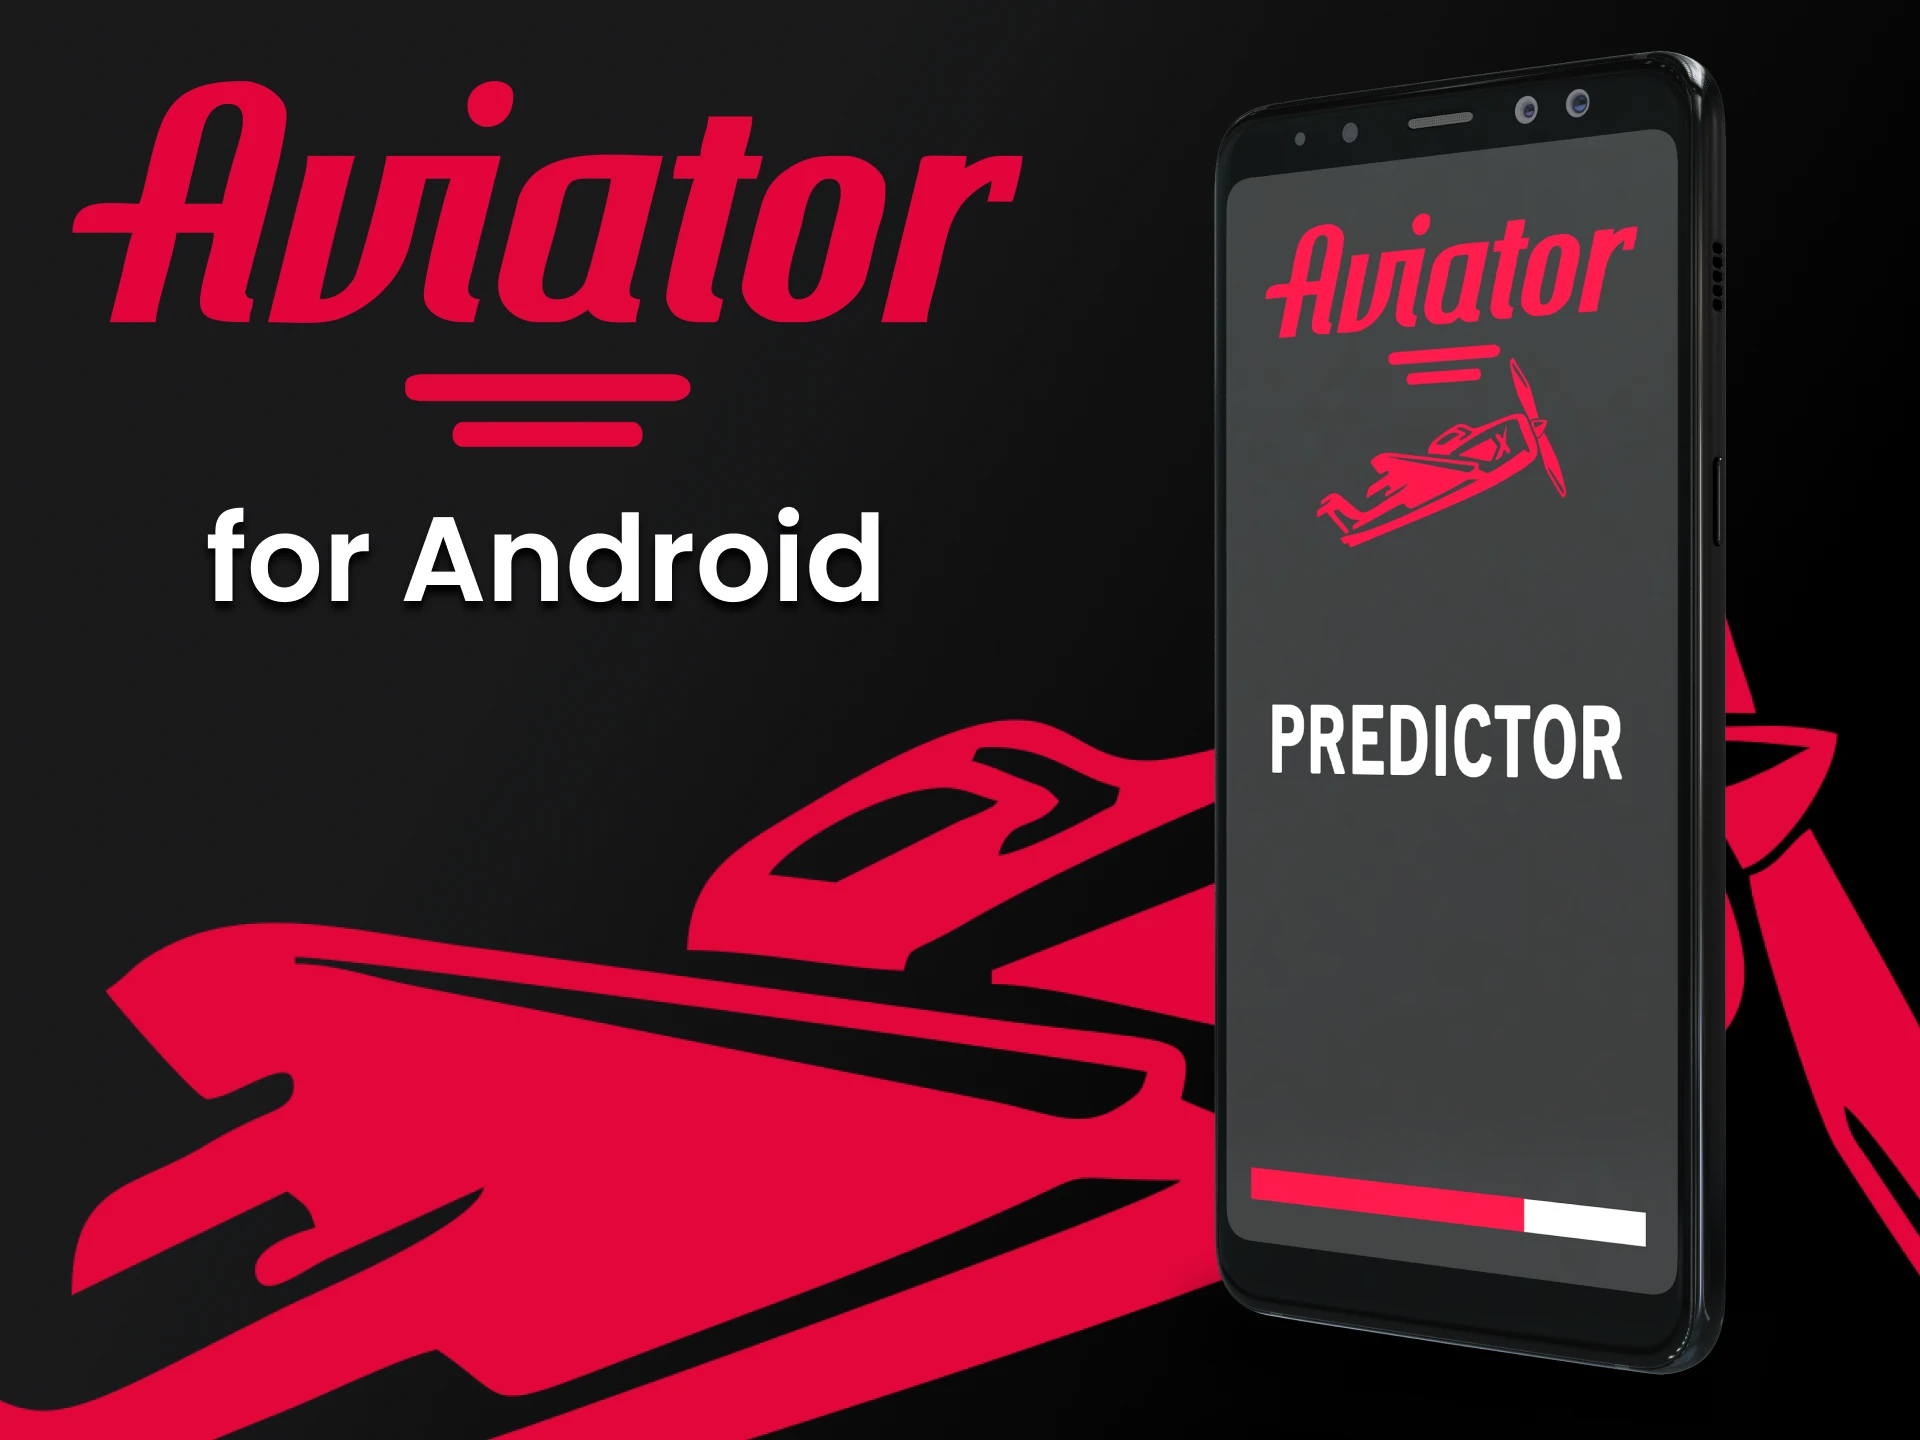 You can use software to play Aviator on an Android device.